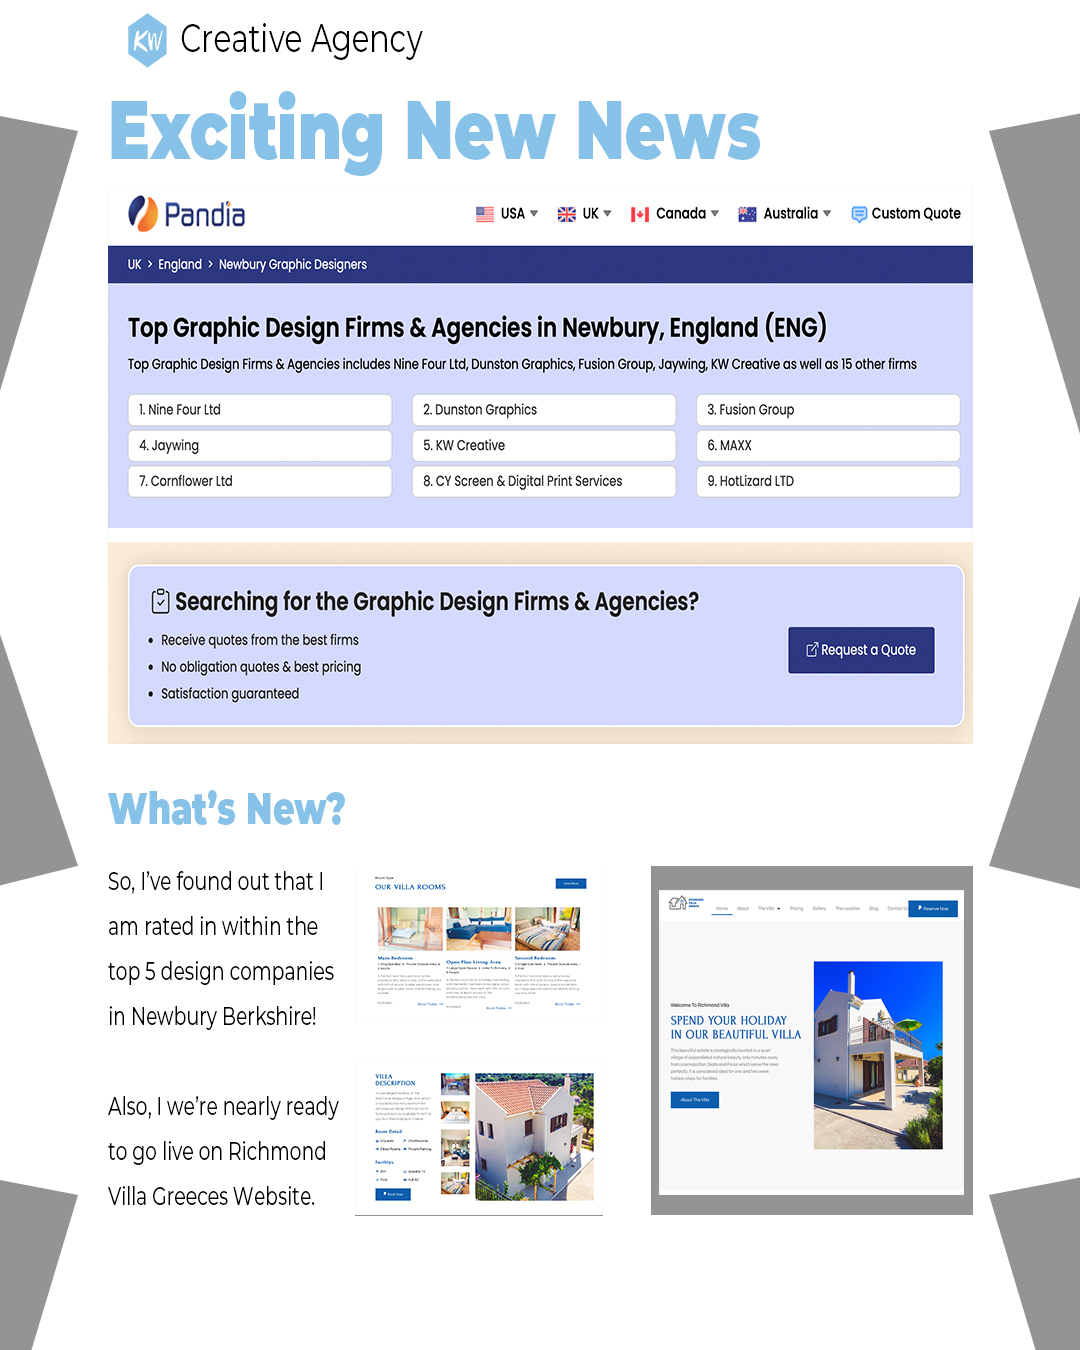 Top Rated Design Agency In Newbury Berkshire - KW Creative New Exciting New News Design By KW Creative - Kent Wynne (C)